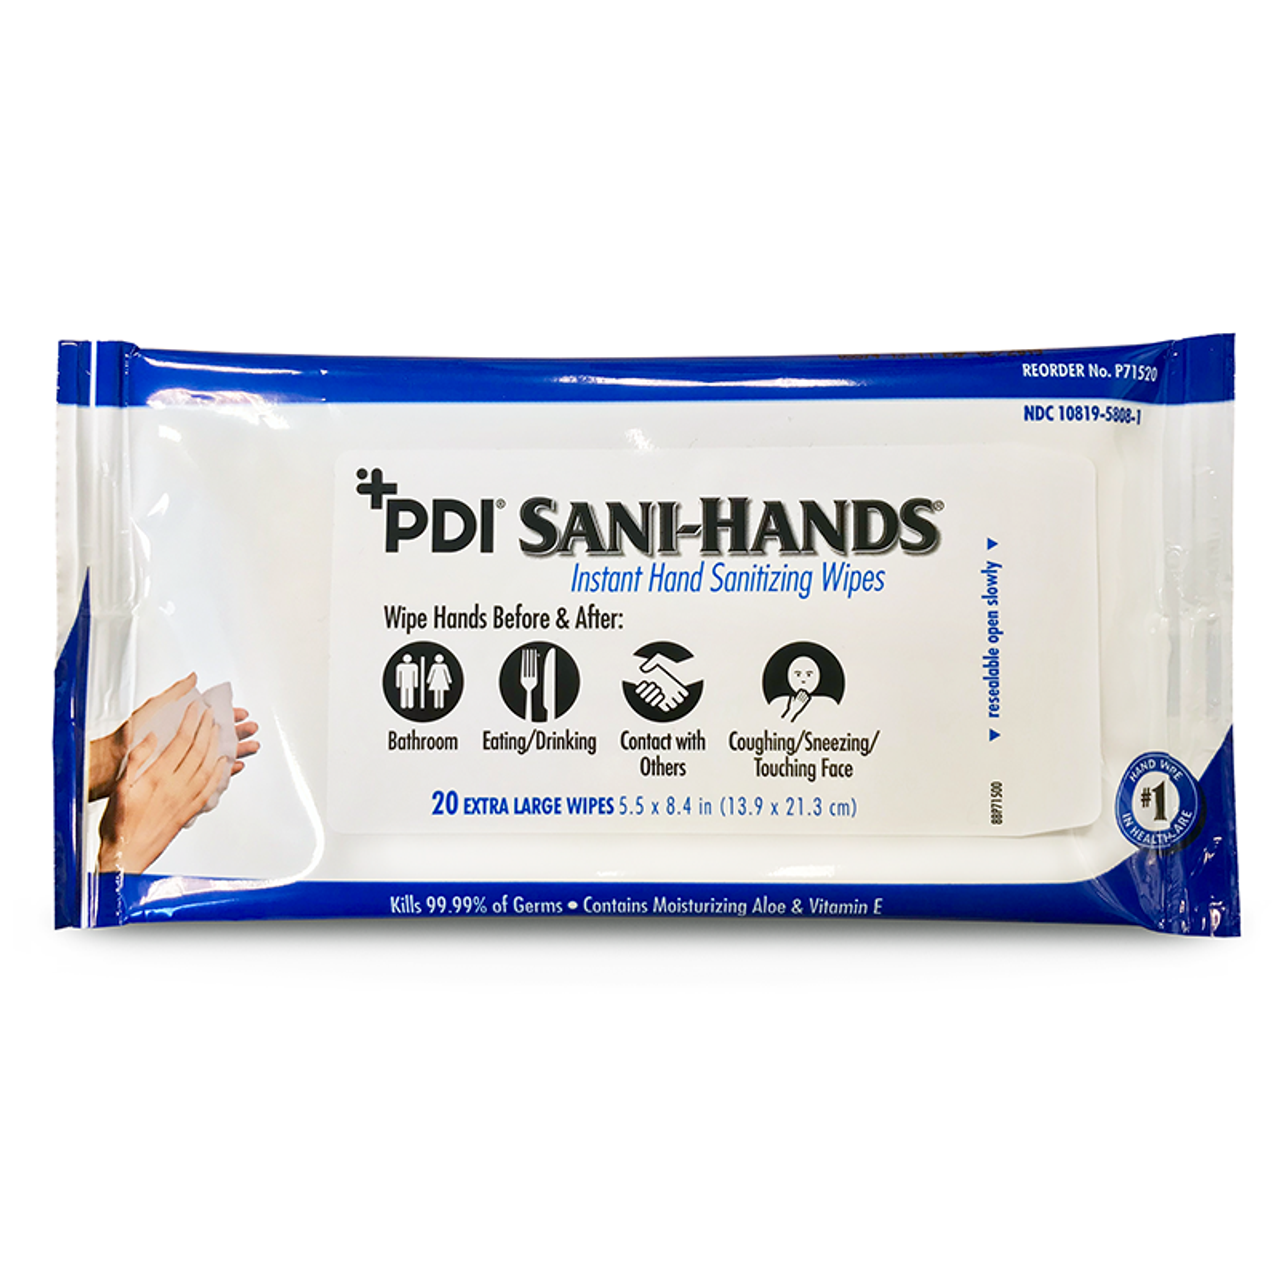 PDI Sani-Hands Instand Hand Sanitizing Wipe, 8.4" x 5.5", 20/pk, Bedside & Perfect for On The Go P71520